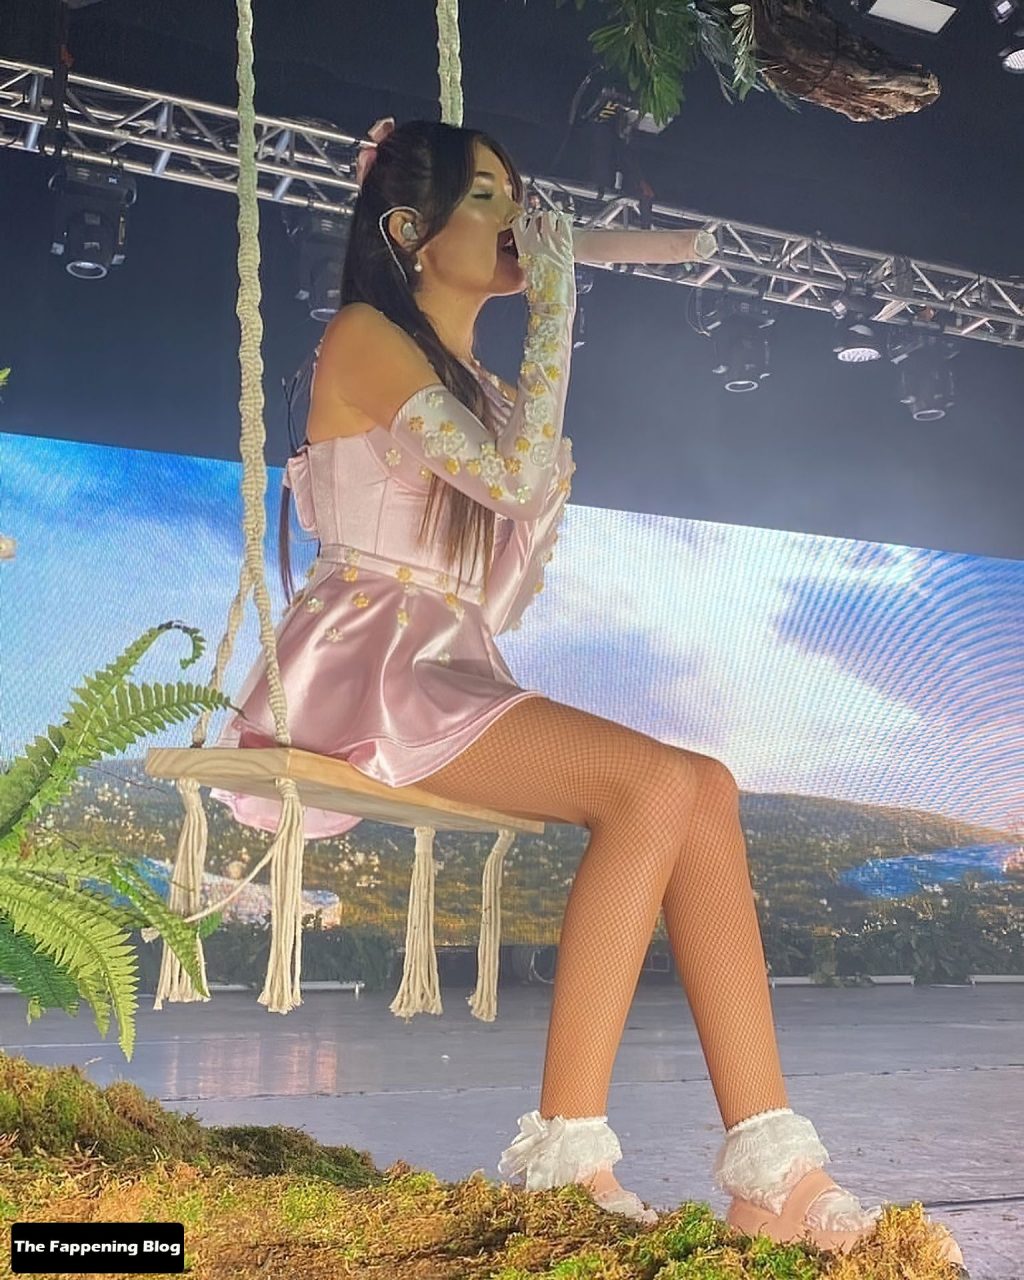 Madison Beer Displays Her Slender Legs and Tits on Stage in Toronto (25 Photos)